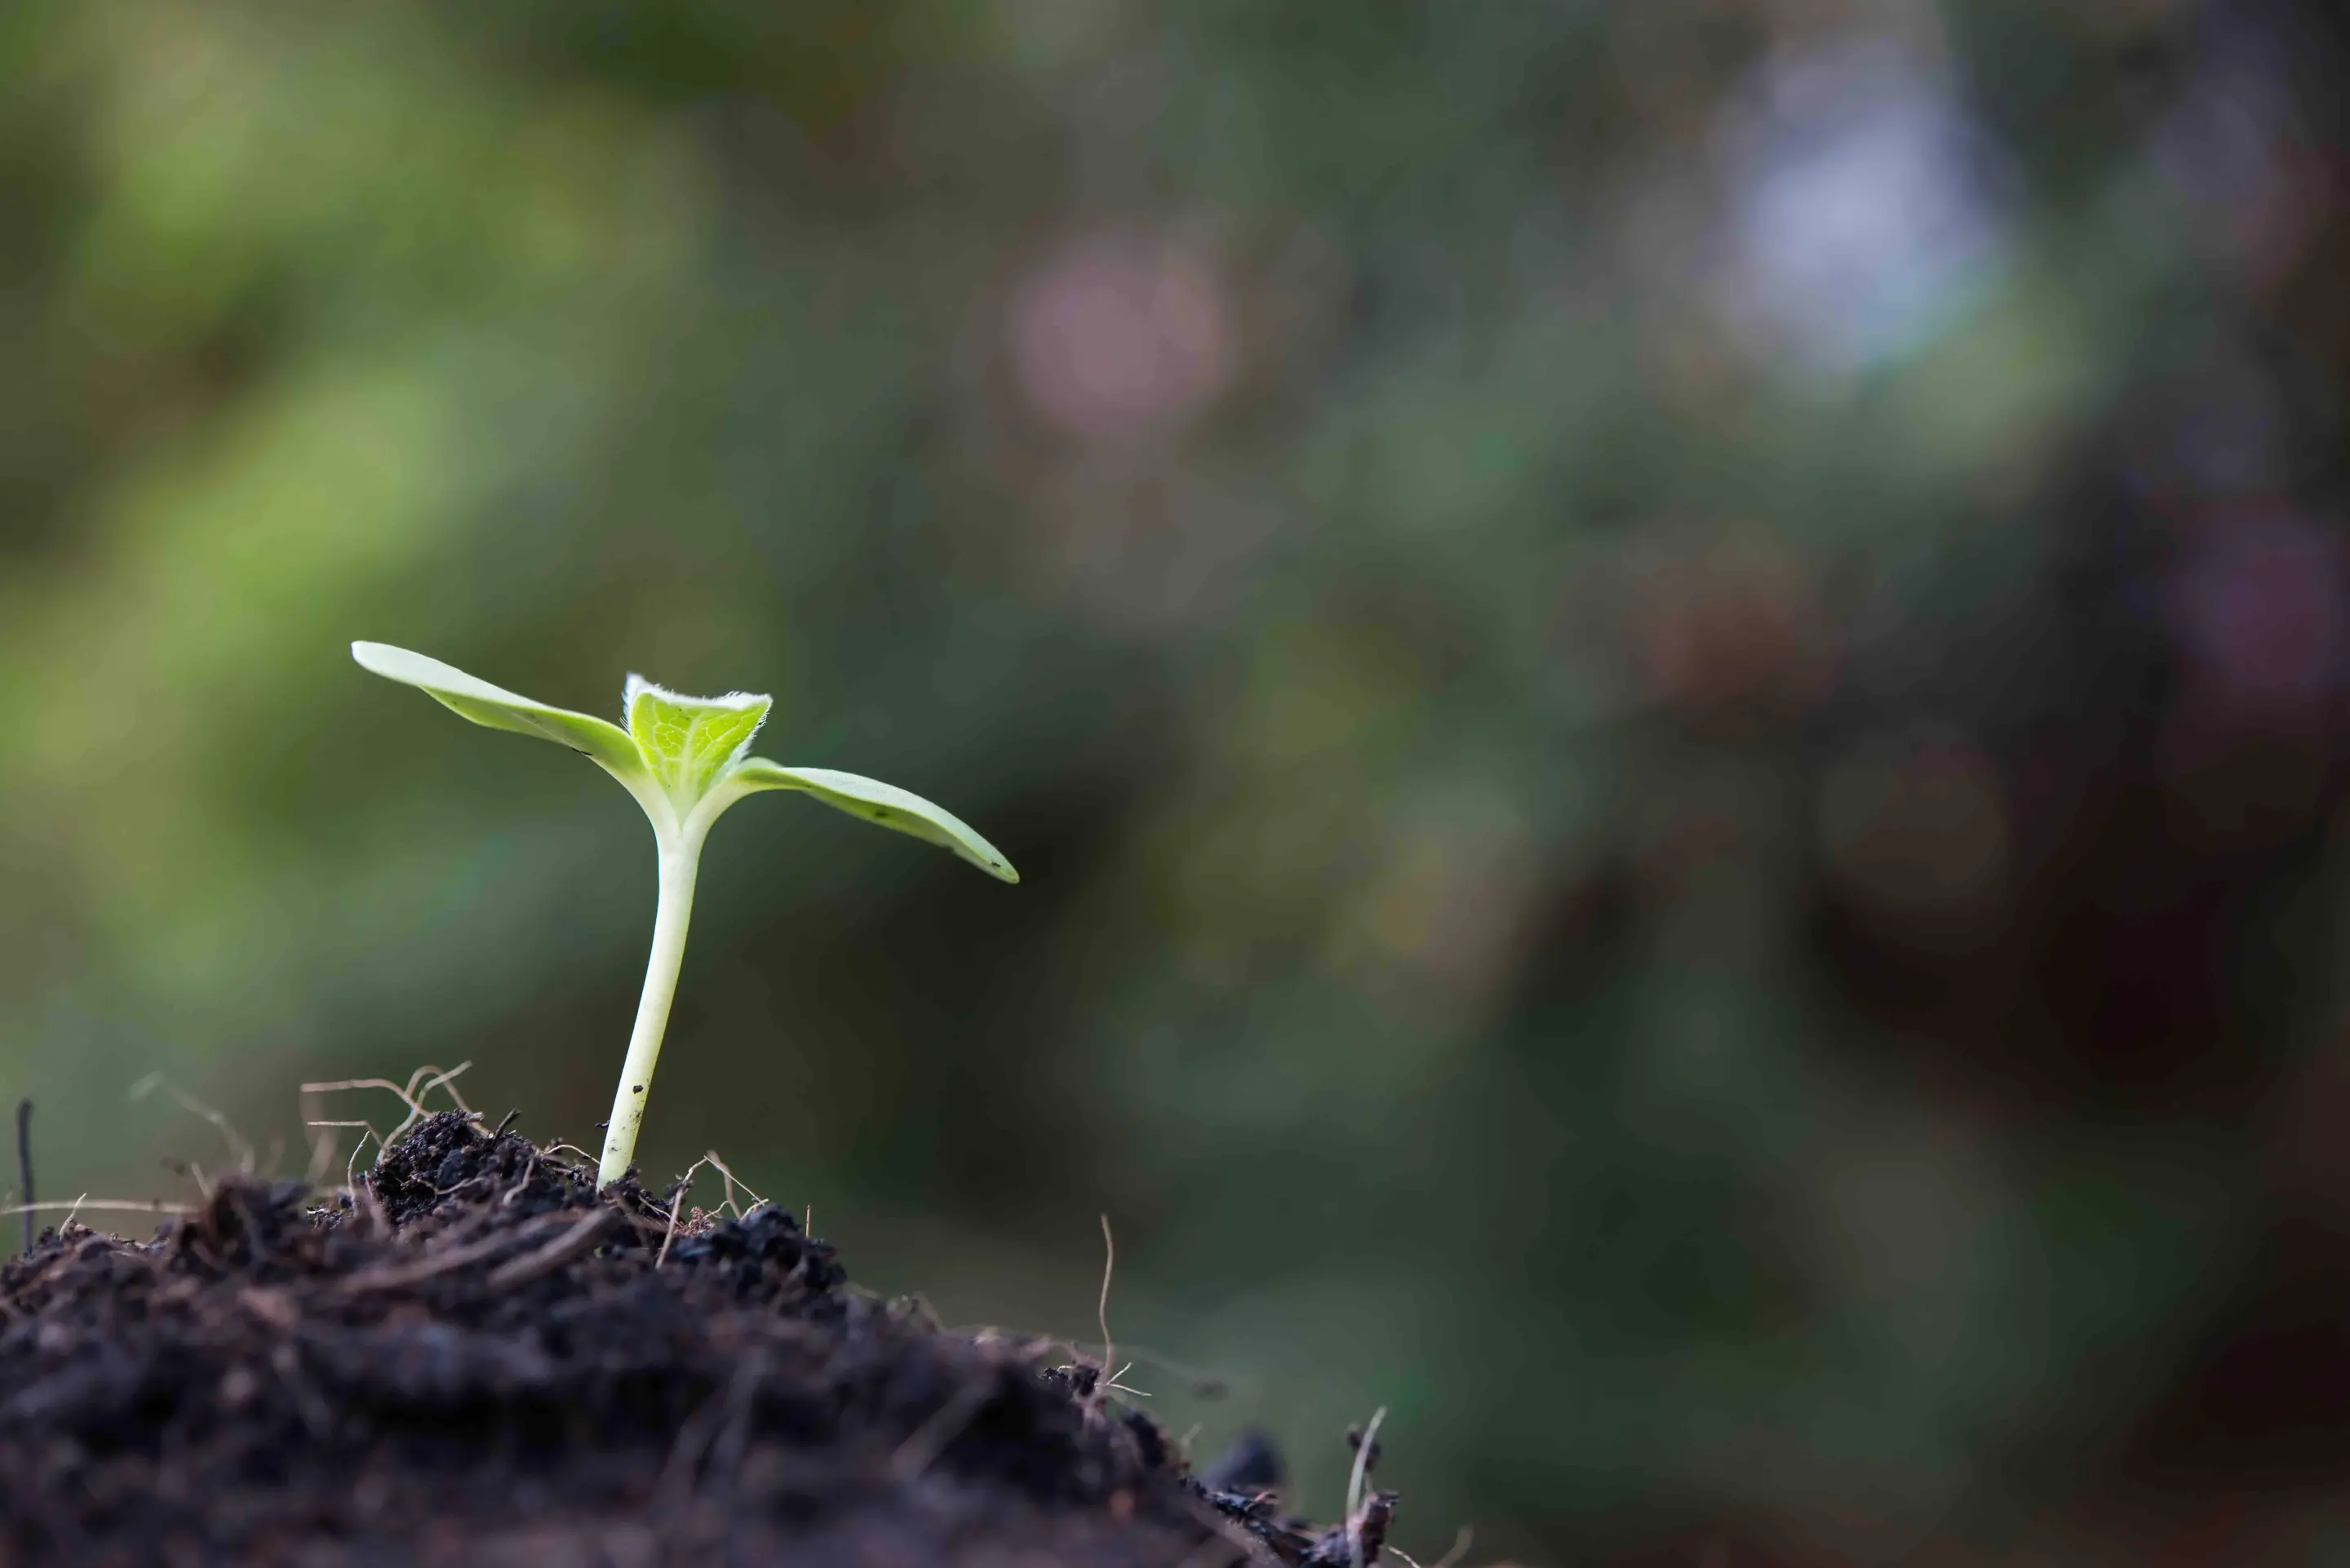 A small, green sprout growing out of a mound of soil, representing the growth of machine learning in Elixir 